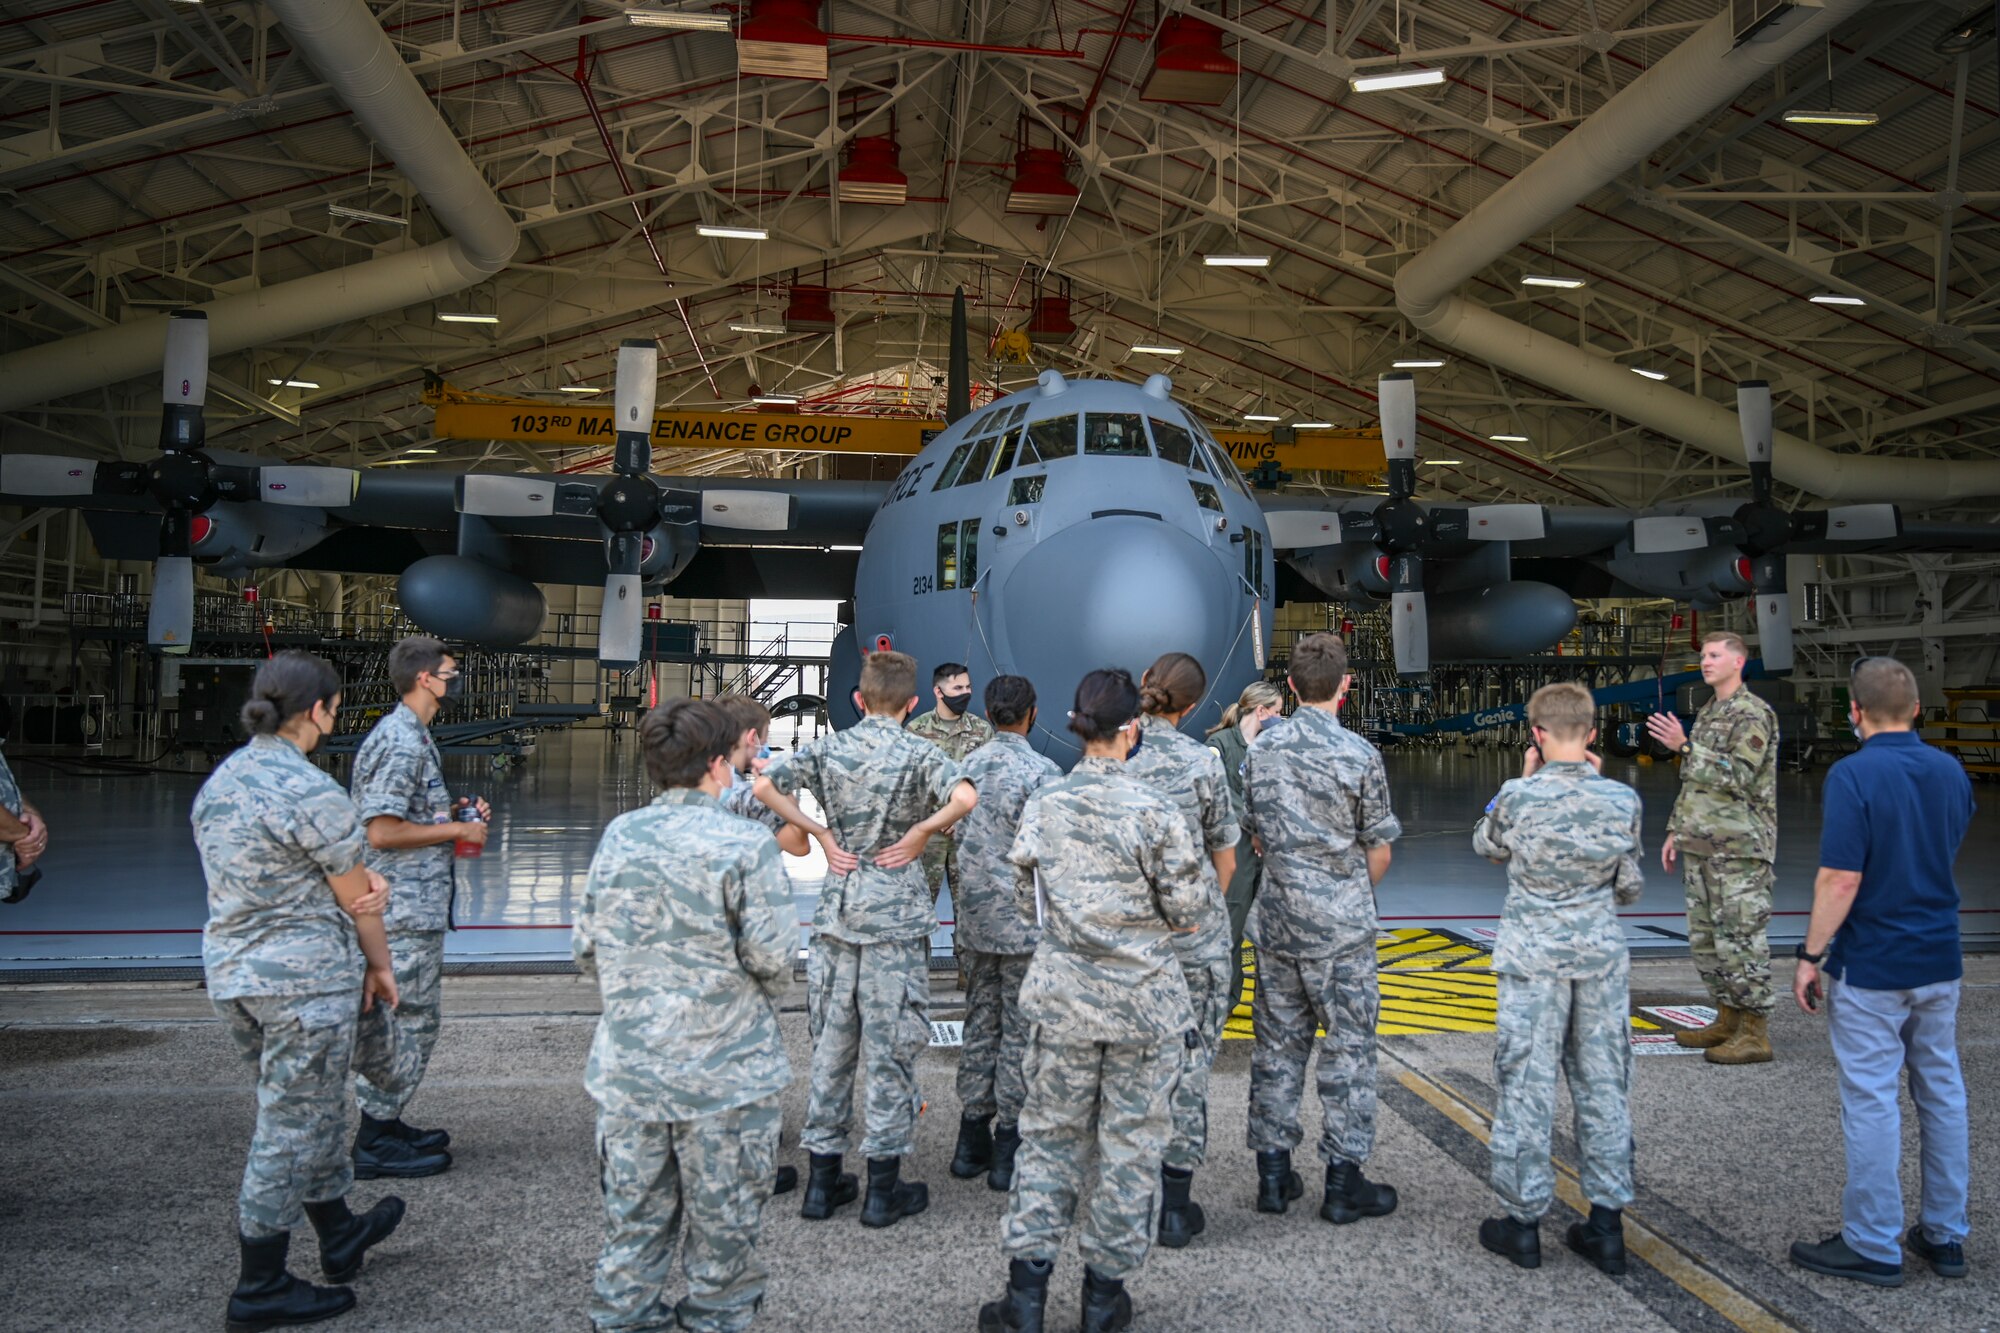 U.S. Air Force 2nd Lt. John Lane (right), assigned to the 103rd Maintenance Squadron, briefs Civil Air Patrol cadets on the 103rd Airlift Wing’s C-130H Hercules tactical airlift mission during a tour of Bradley Air National Guard Base in East Granby, Connecticut, Aug. 13, 2021. Cadets from the Connecticut Wing’s Danielson and Plainville squadrons got an up-close look at C-130H aircraft, the engines that power them, and learned about the 103rd Airlift Wing’s mission. (U.S. Air National Guard photo by Tech. Sgt. Steven Tucker)